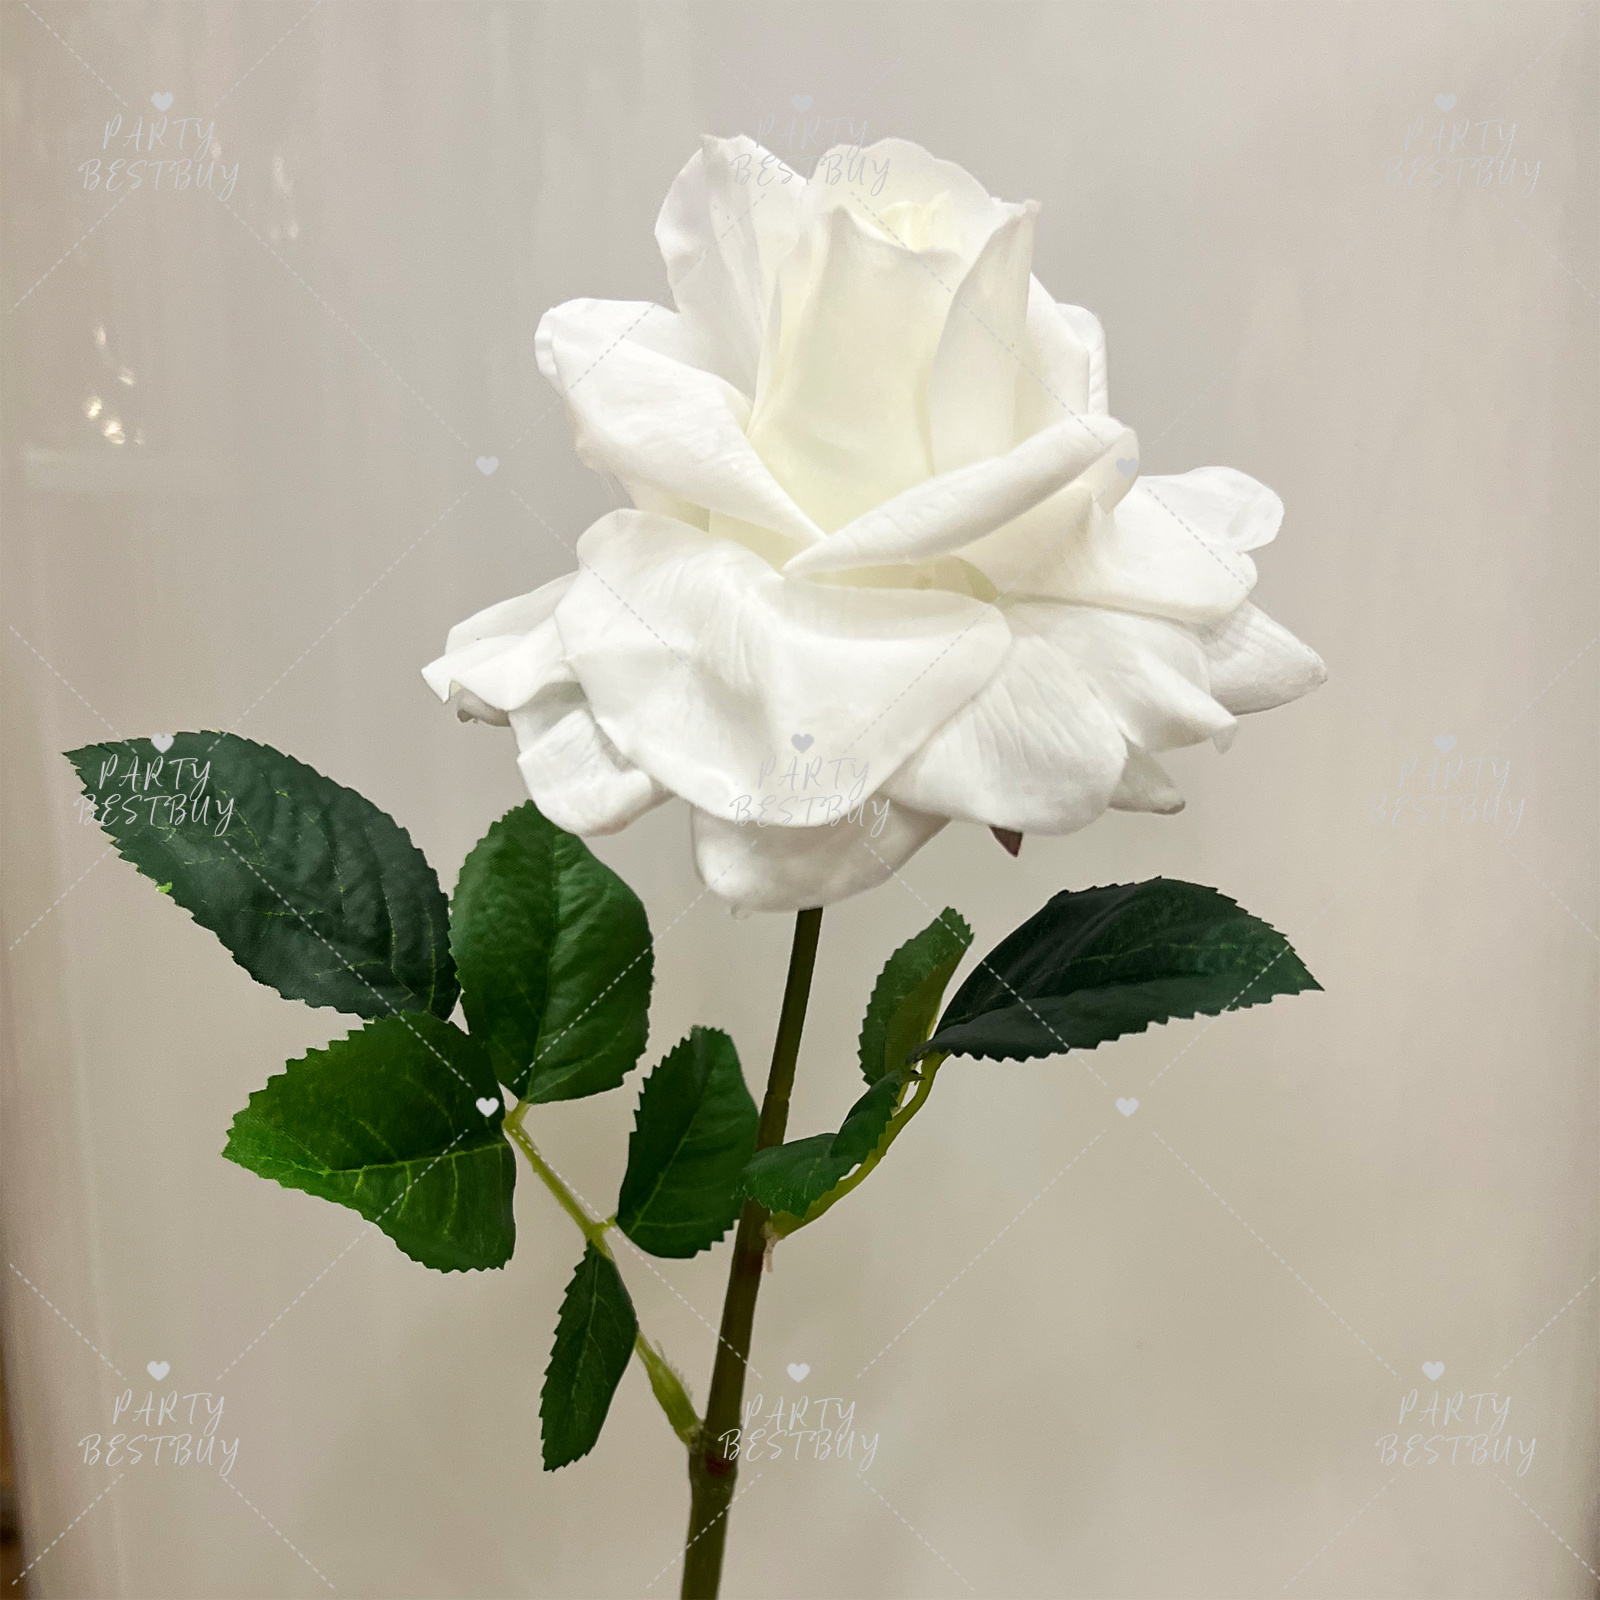 10x White Latex Real Touch flowers Rose Artificial Fake Flowers Bouquet  Wedding Party Shop - Party Bestbuy Online Store